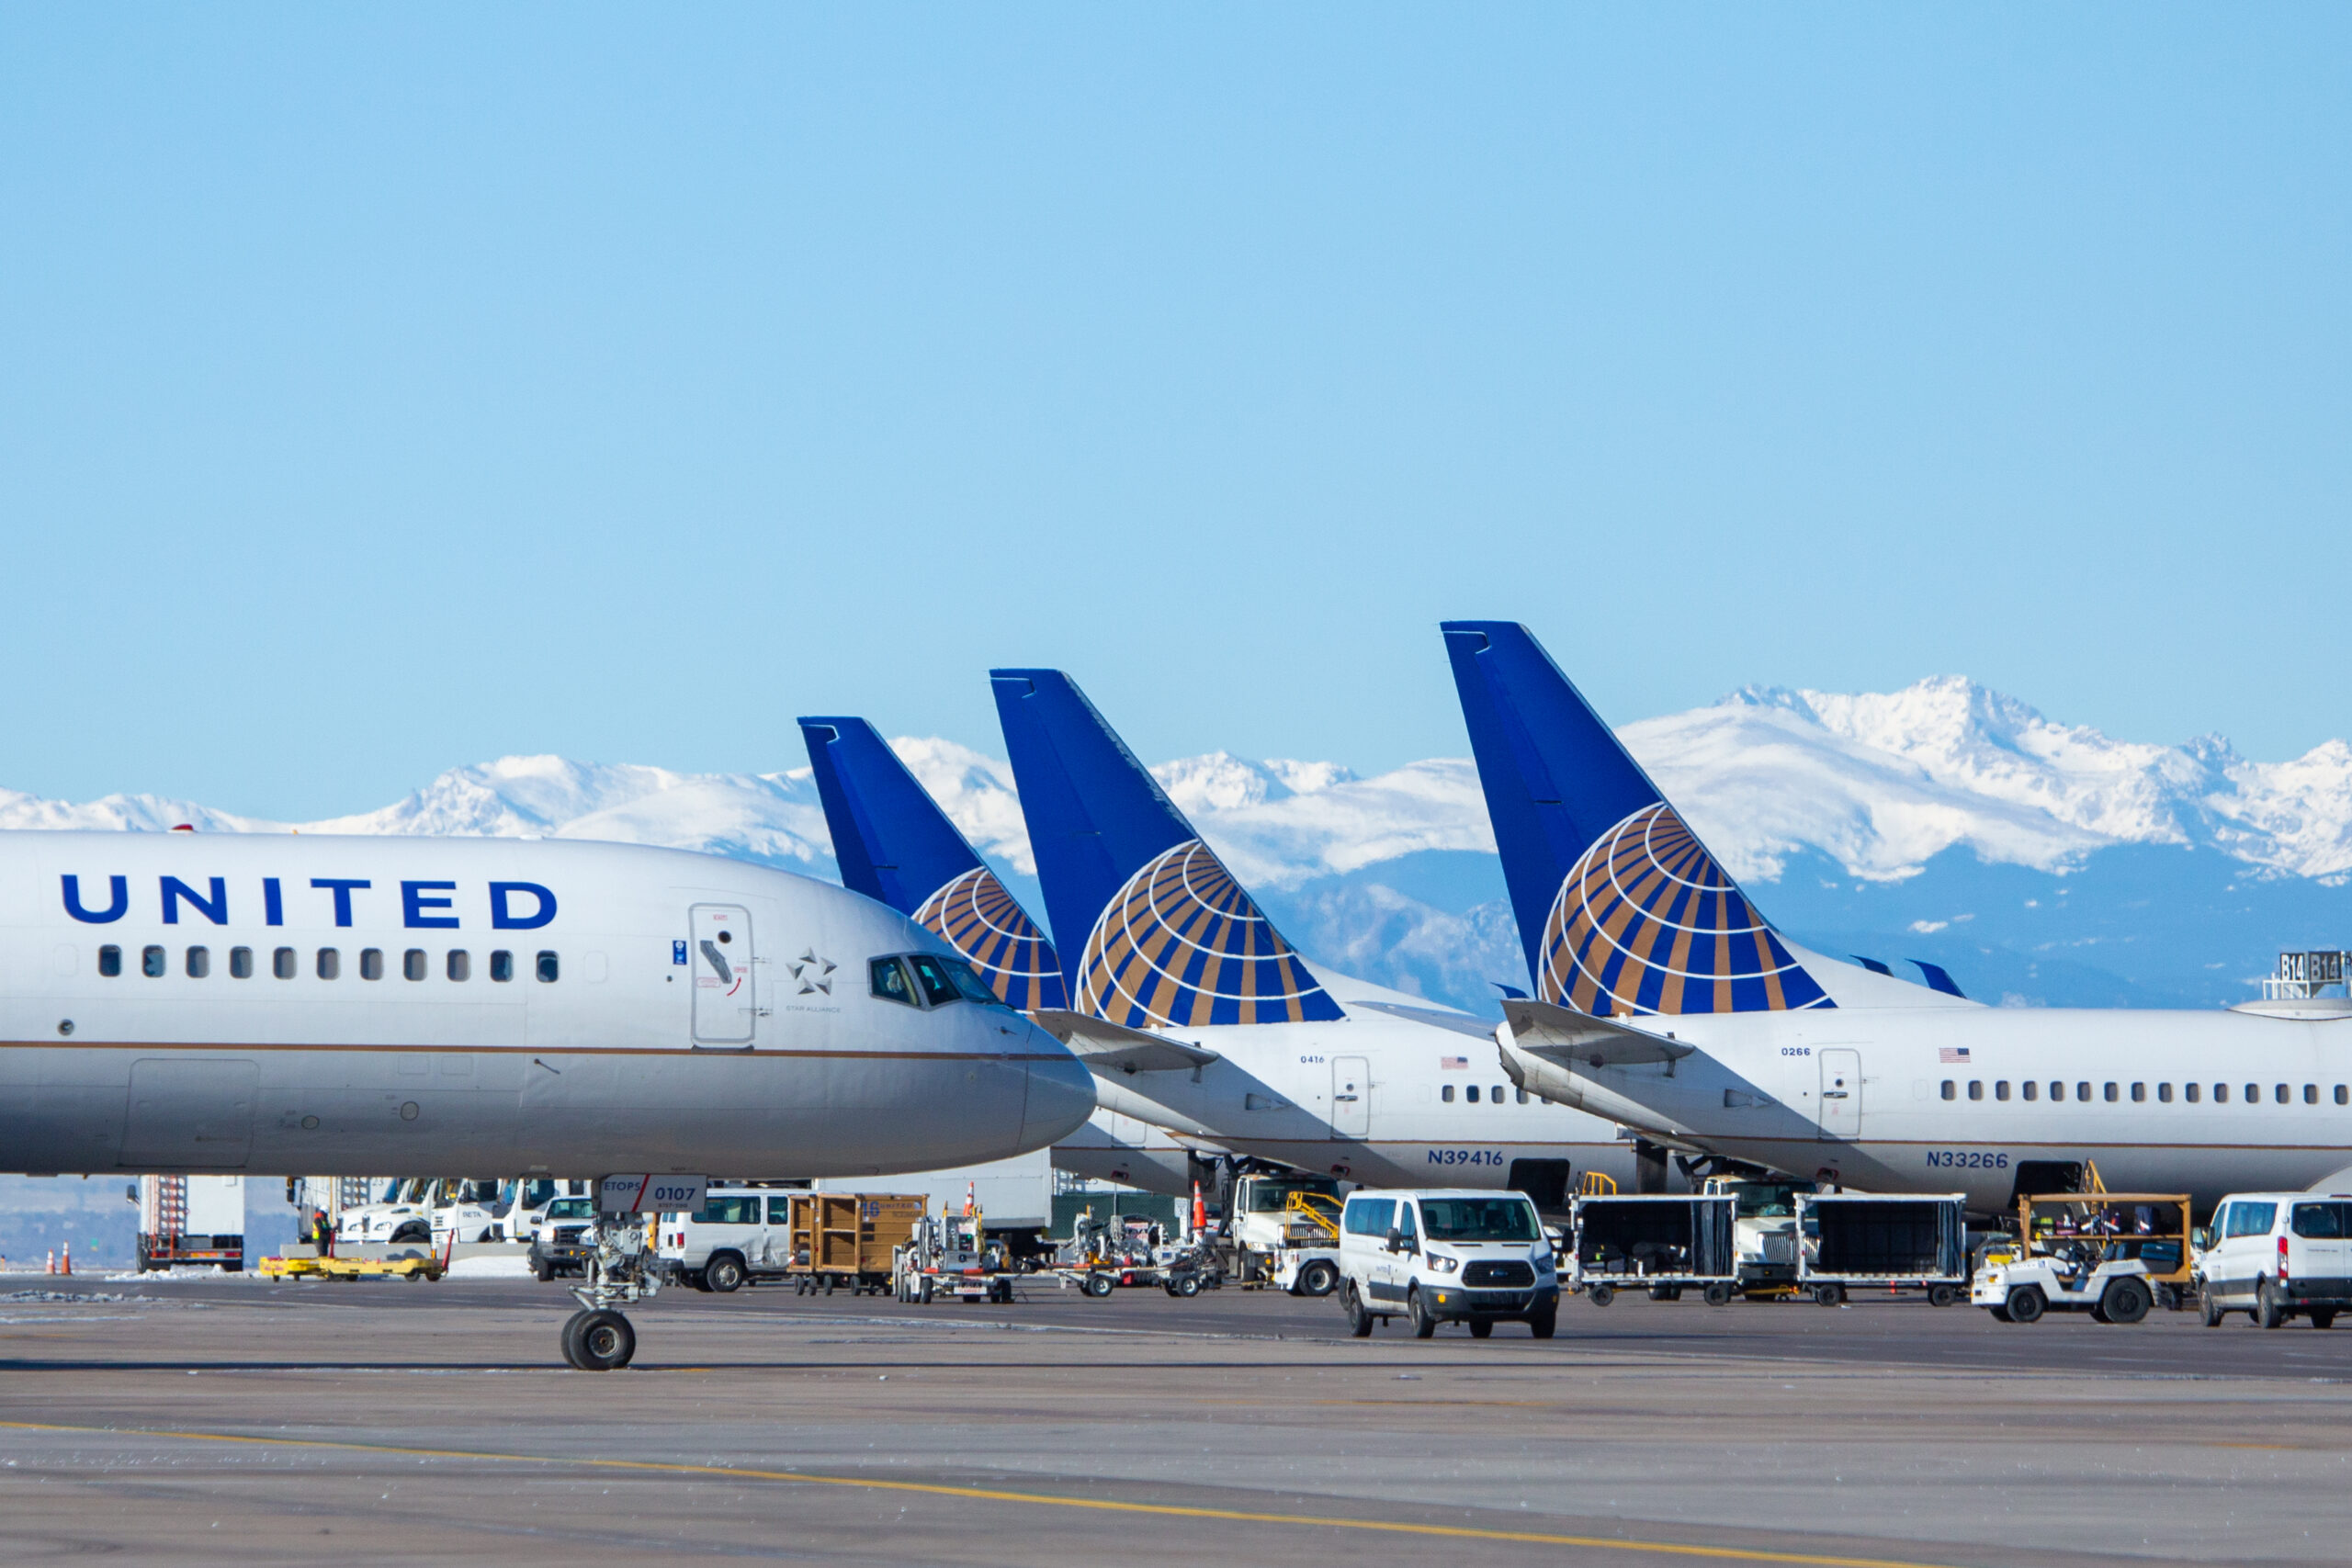 After Major Route Expansion, United to Become the Largest Carrier Across Both the Atlantic and Pacific